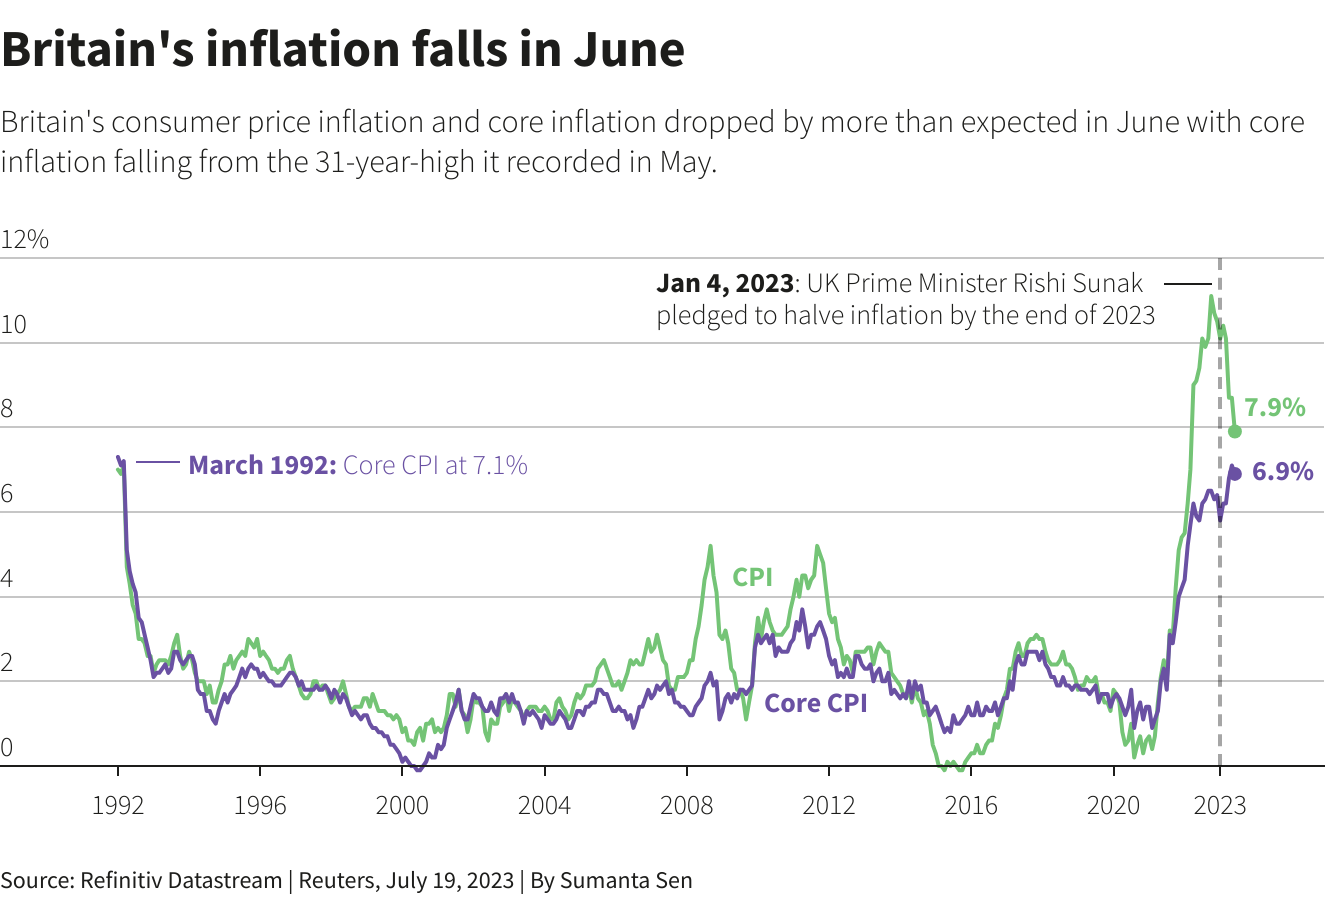 Britain's consumer price inflation and core inflation dropped by more than expected in June with core inflation falling fromt he 31 year high it recorded in May